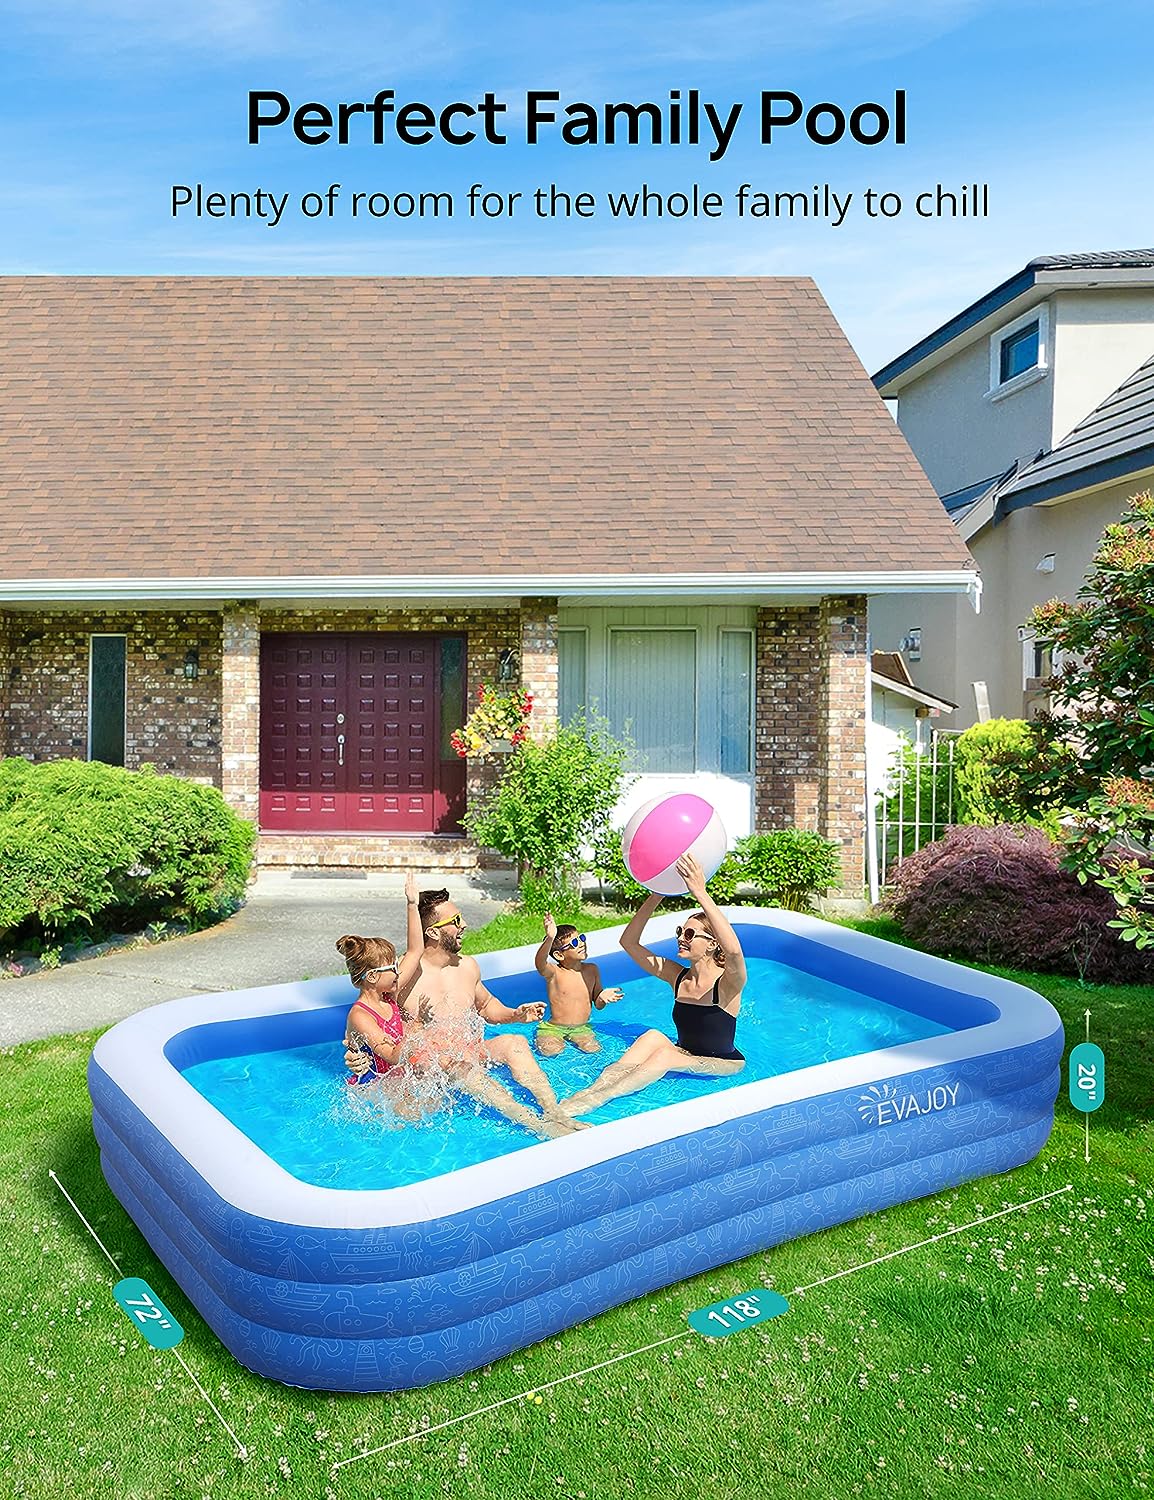 EVAJOY Inflatable Pool Review